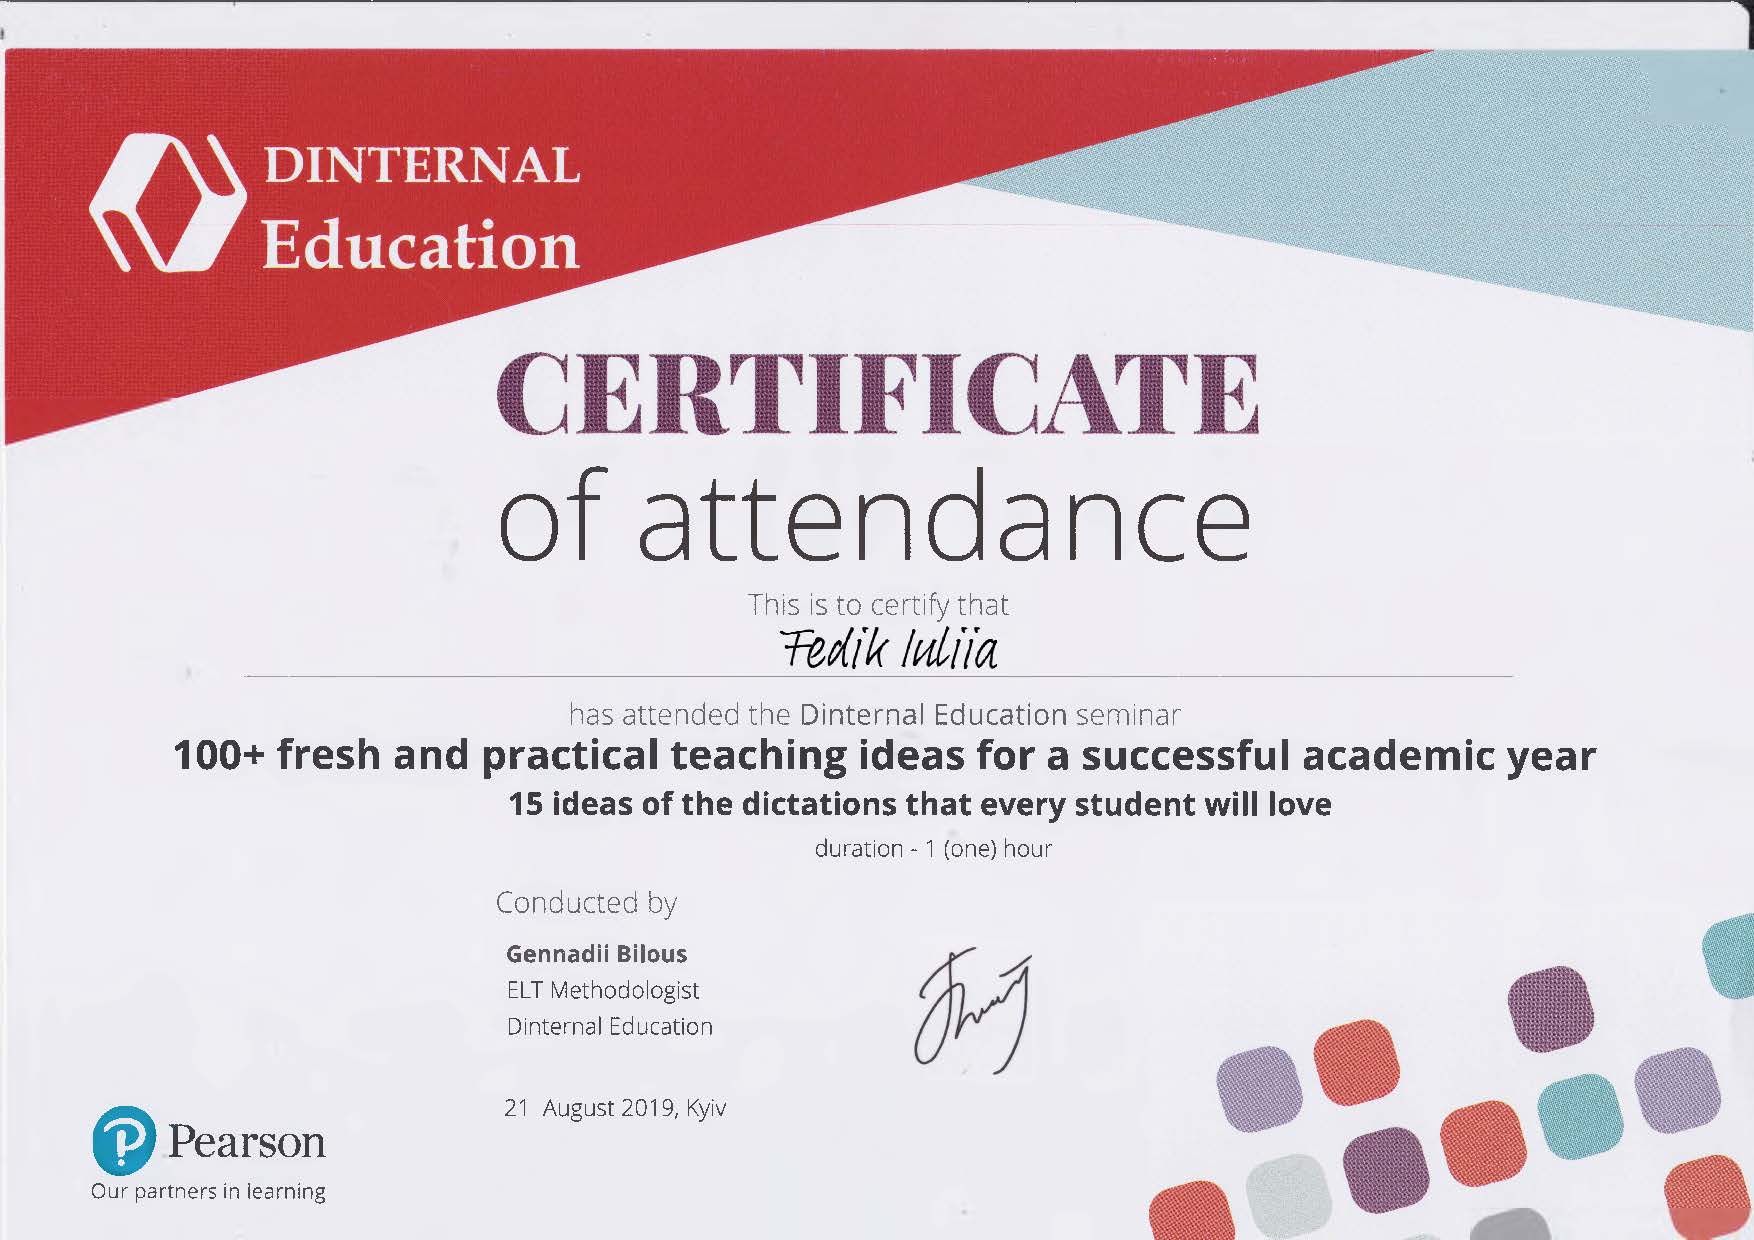 100+ fresh and practical teaching ideas for a successful academic year